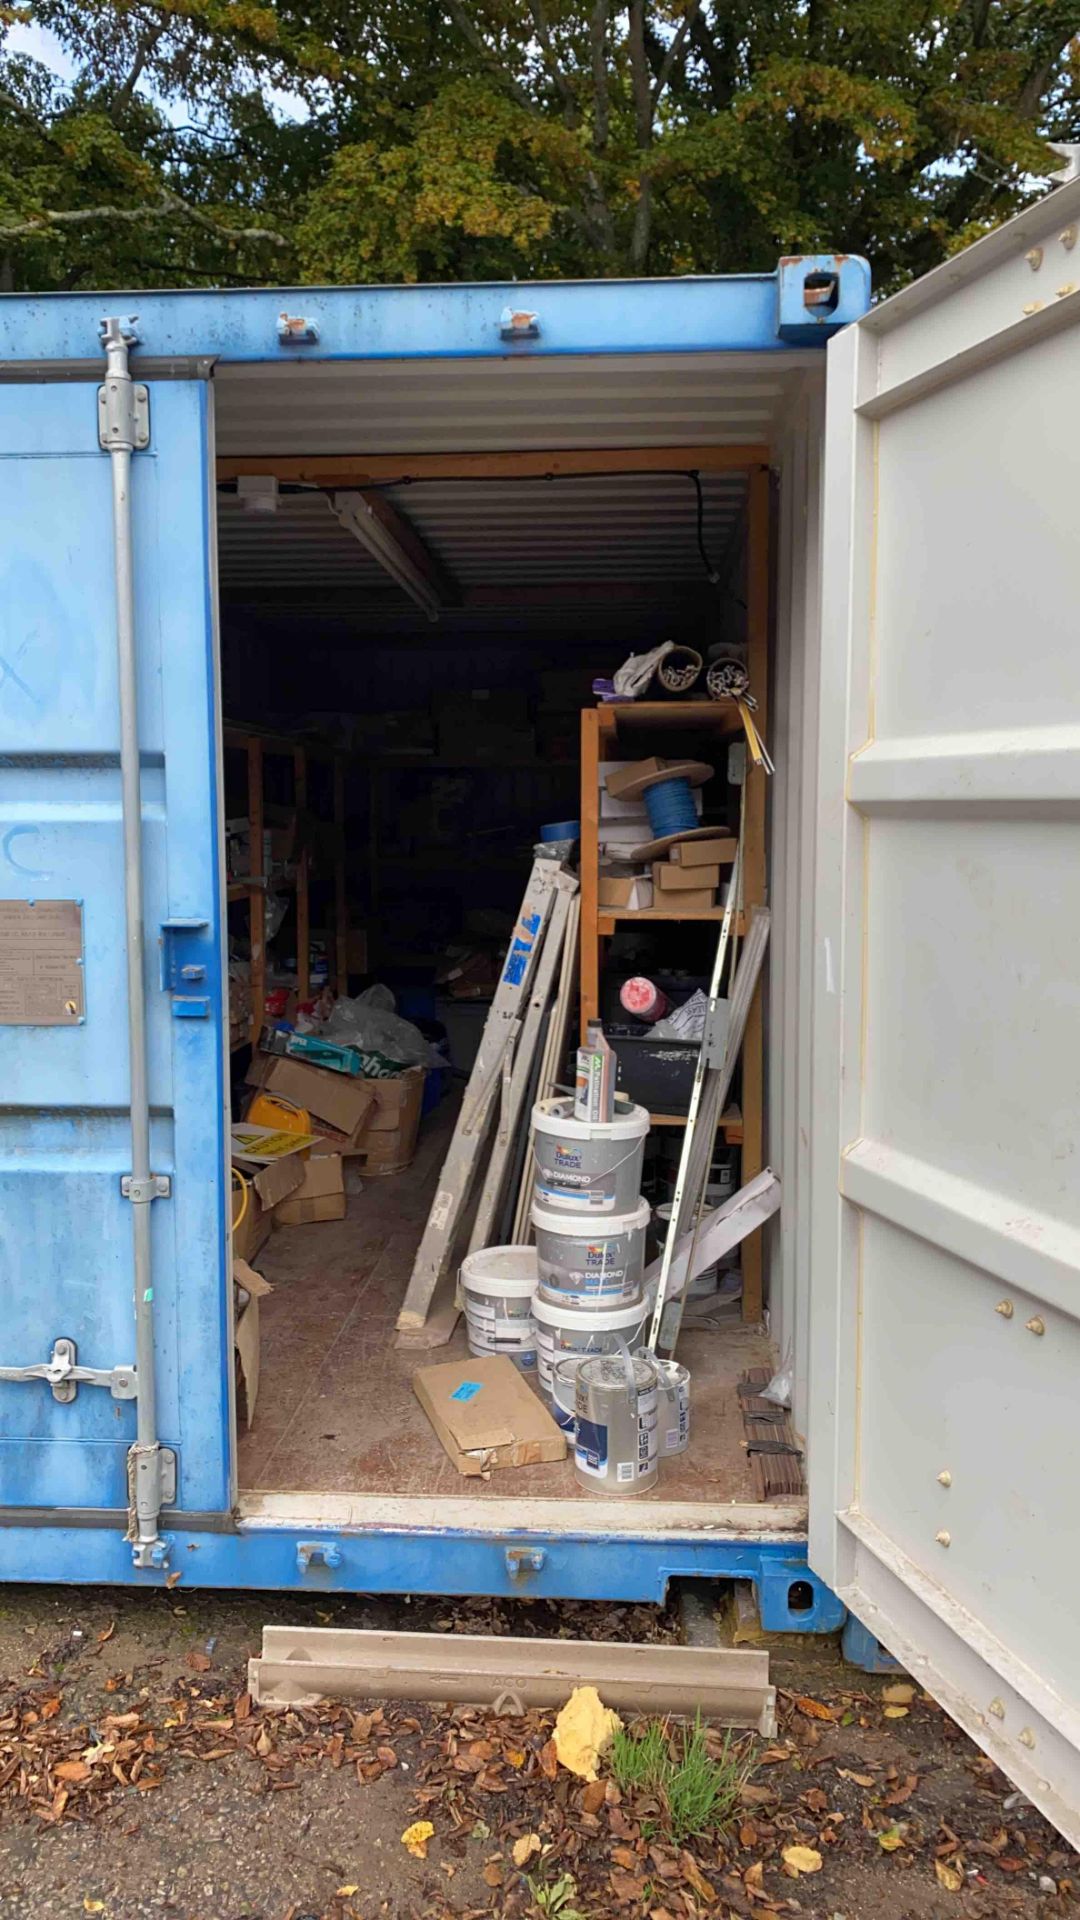 20” steel shipping container excluding contents - please note this item can be collected Monday 23rd - Image 2 of 3